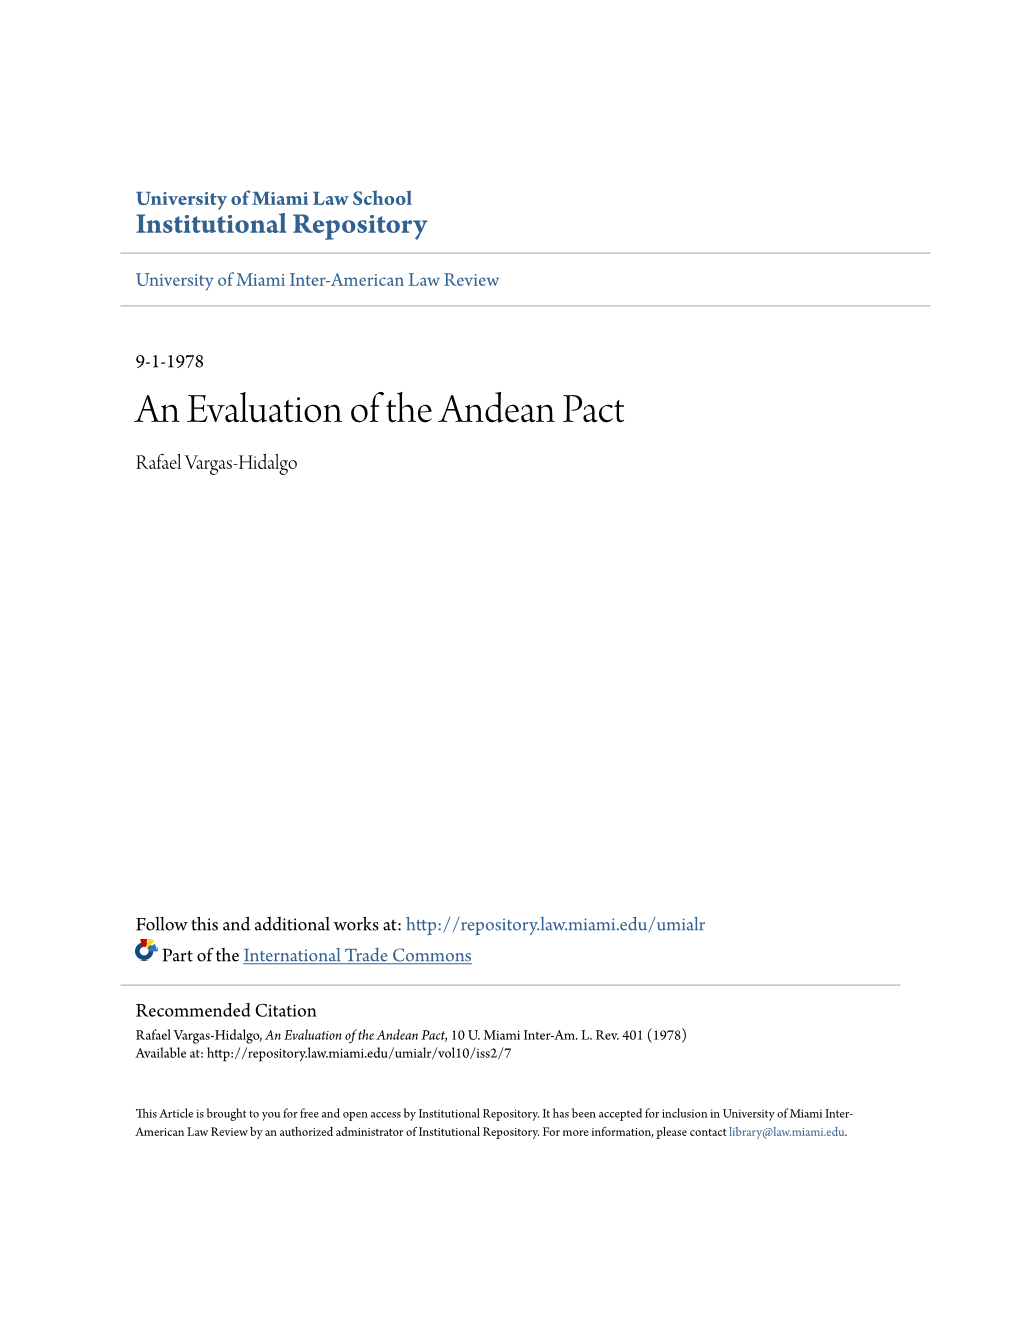 An Evaluation of the Andean Pact Rafael Vargas-Hidalgo